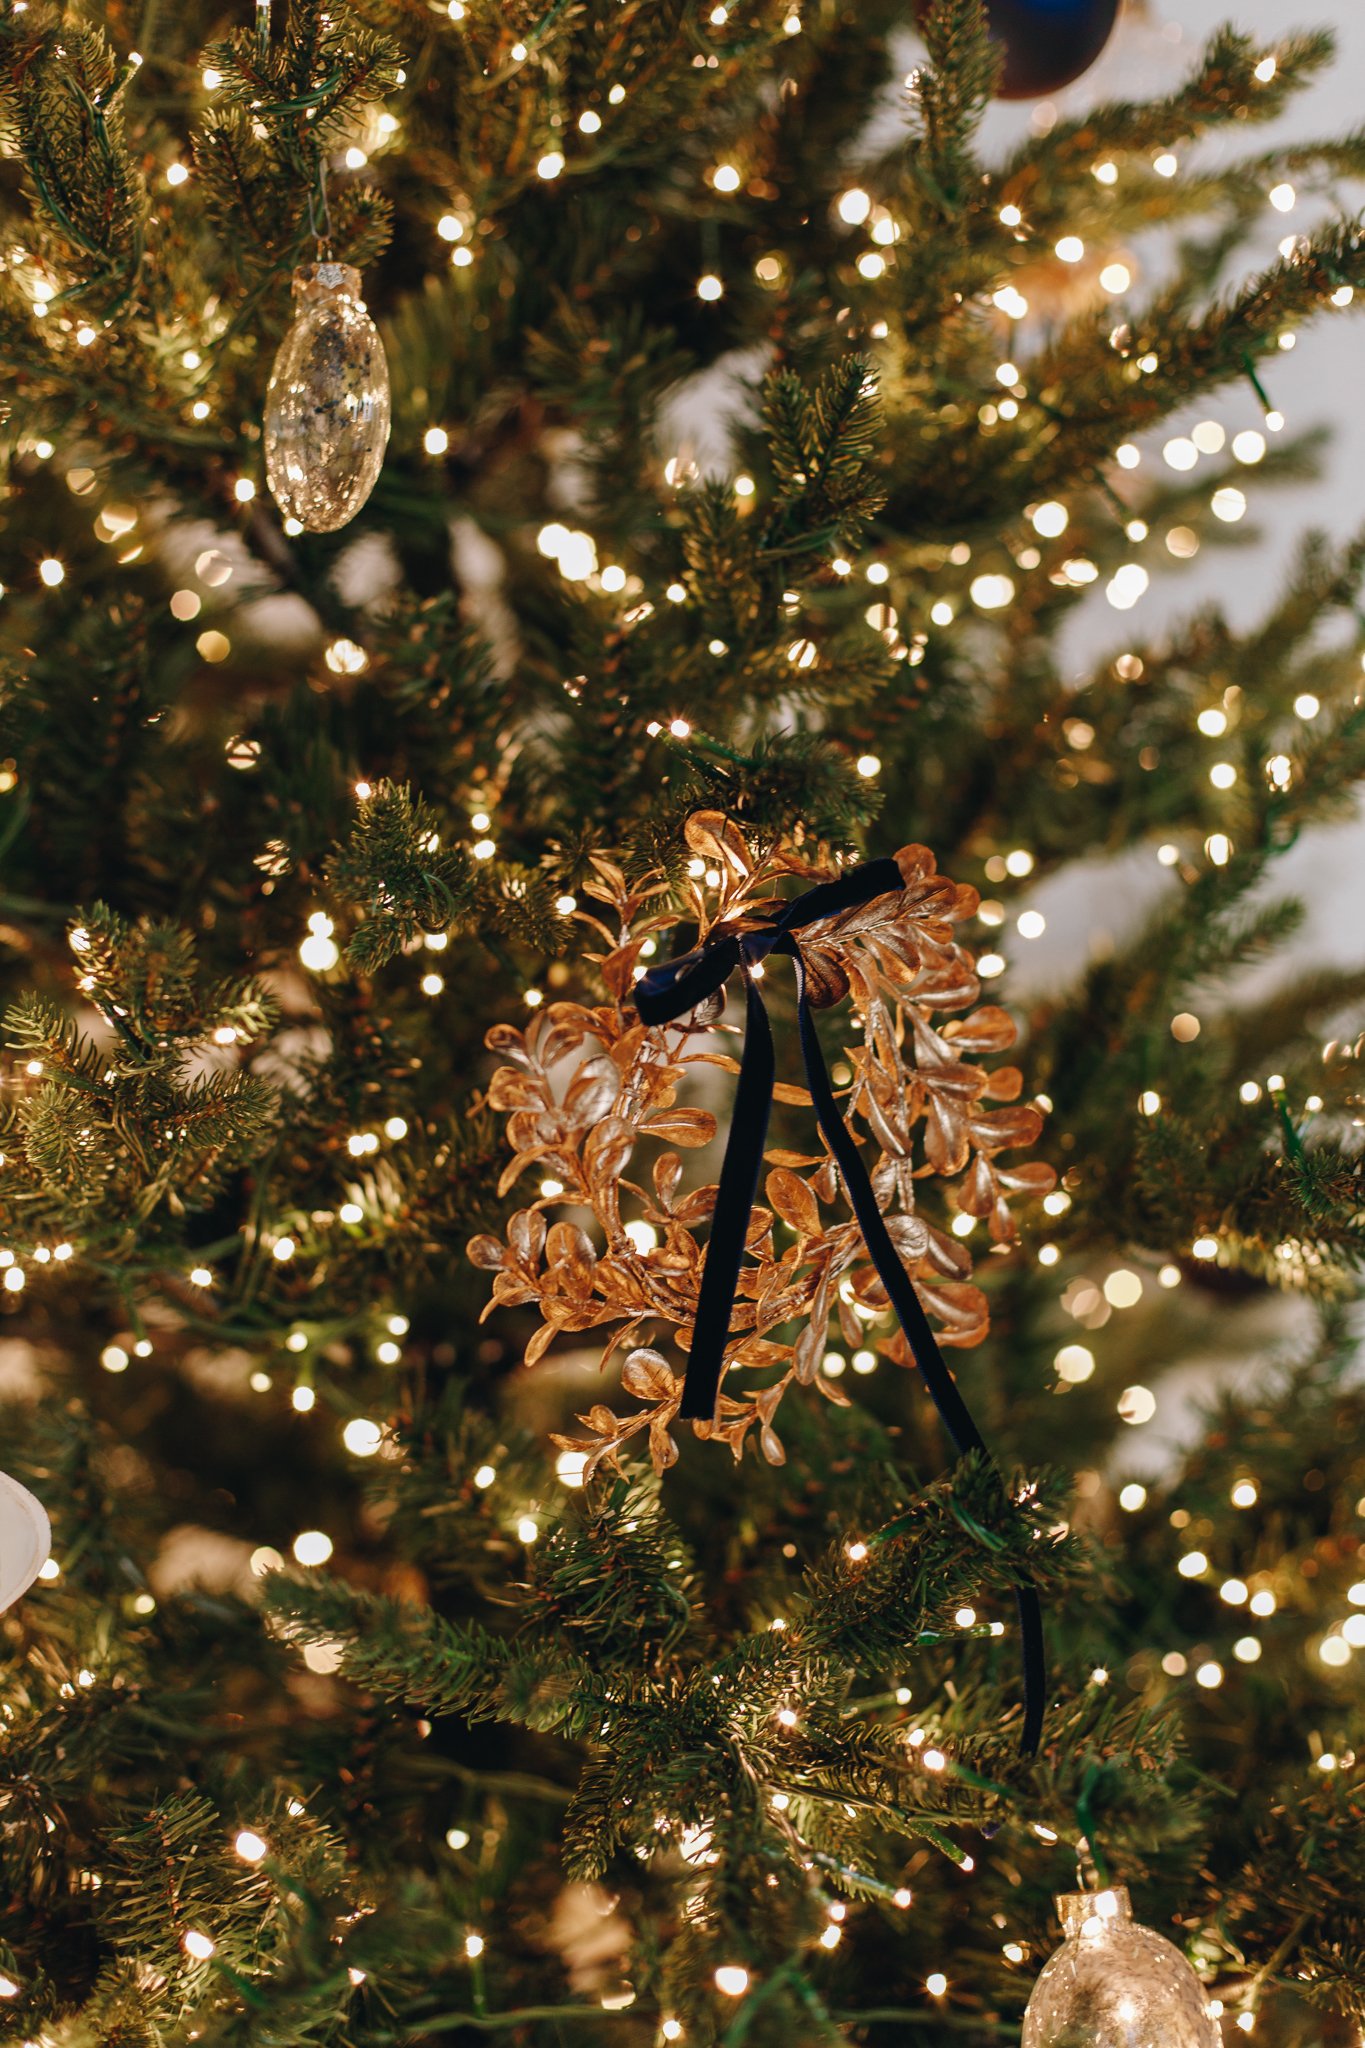 How to Help Your Christmas Tree Decor Embrace the Navy Blue Trend